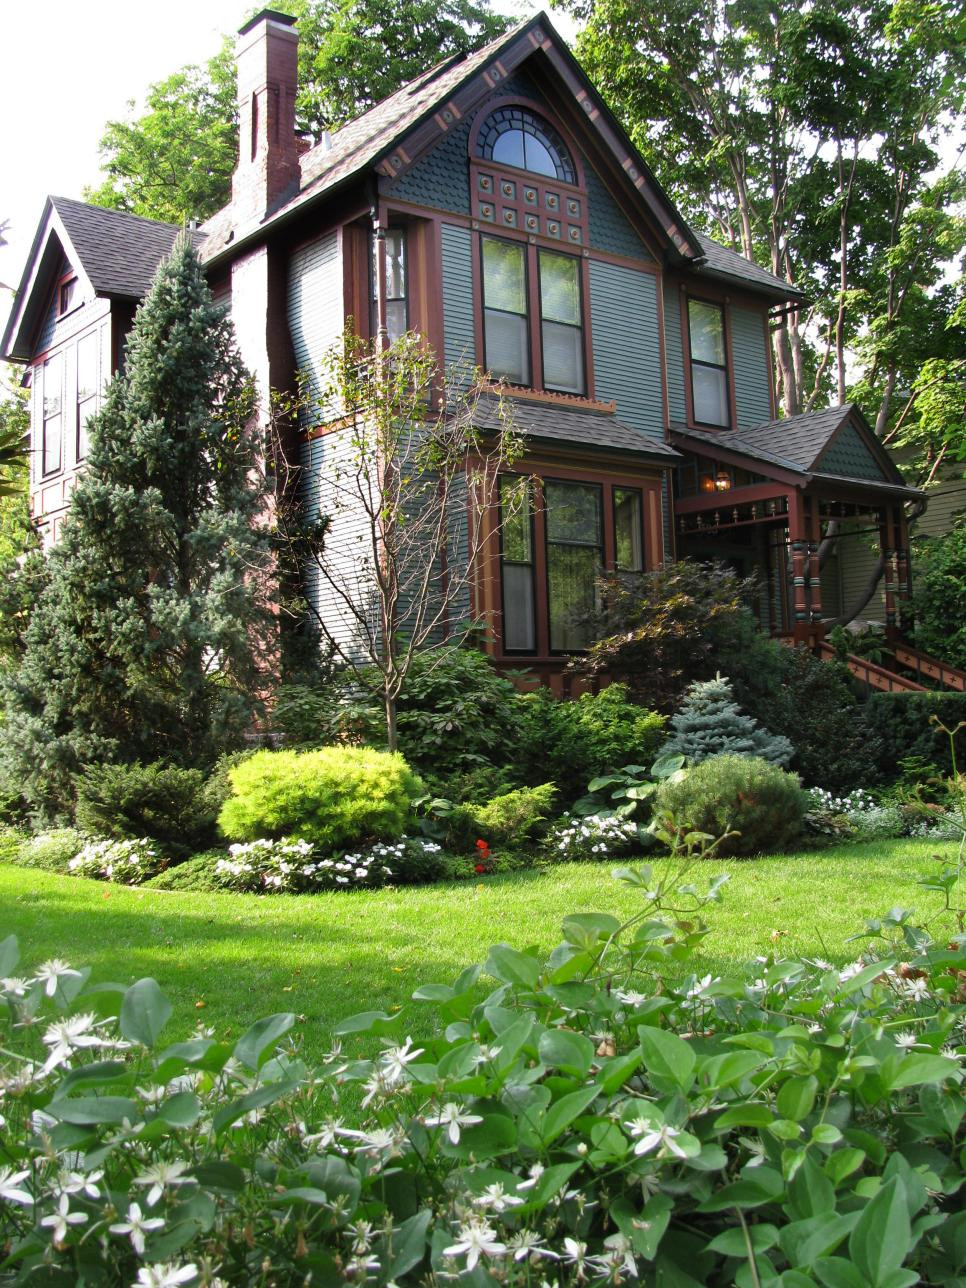 Front Yard Landscape Design
 The Important Factors to Consider to Get the Right Front